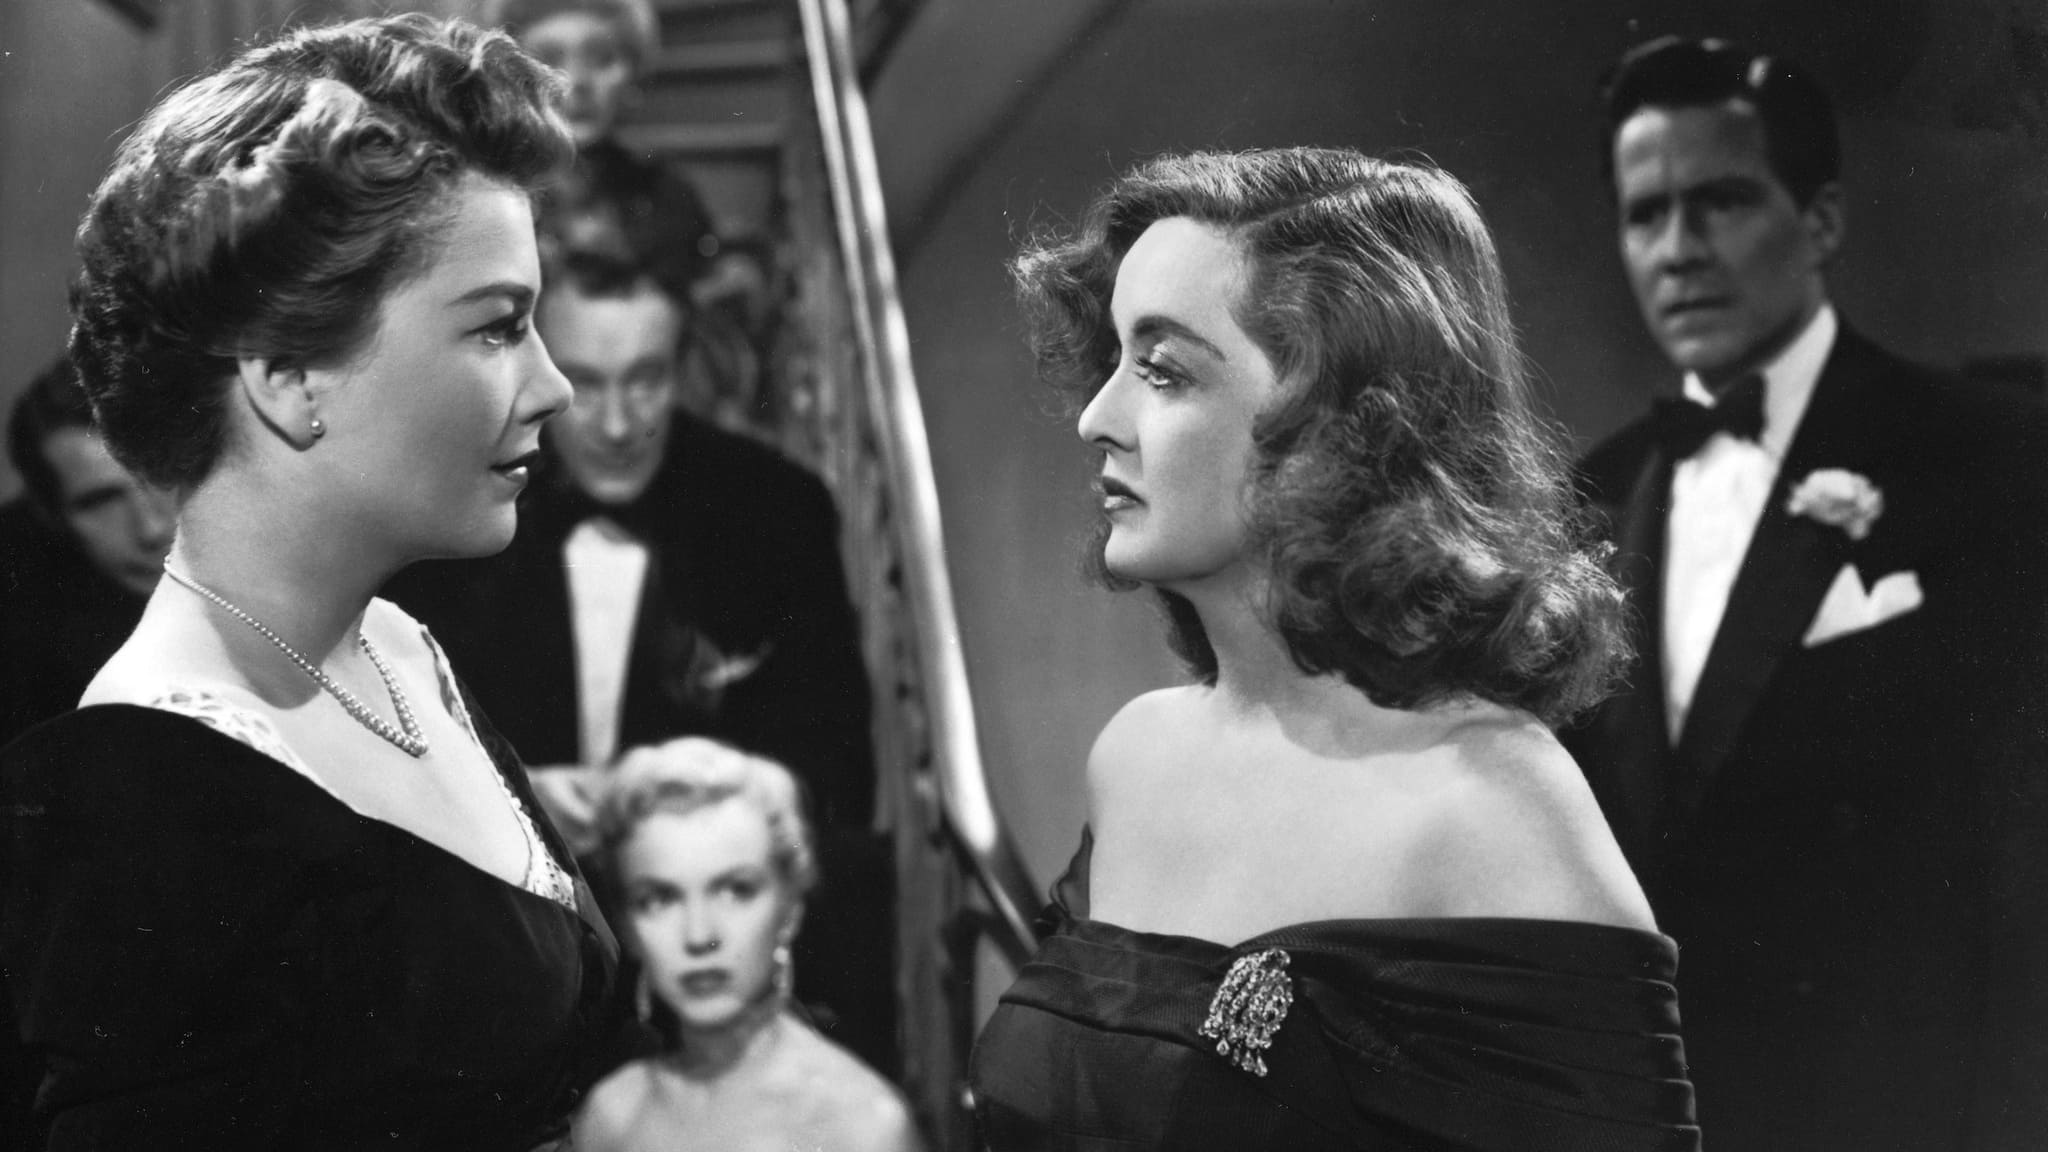 All About Eve 1950 Soap2Day